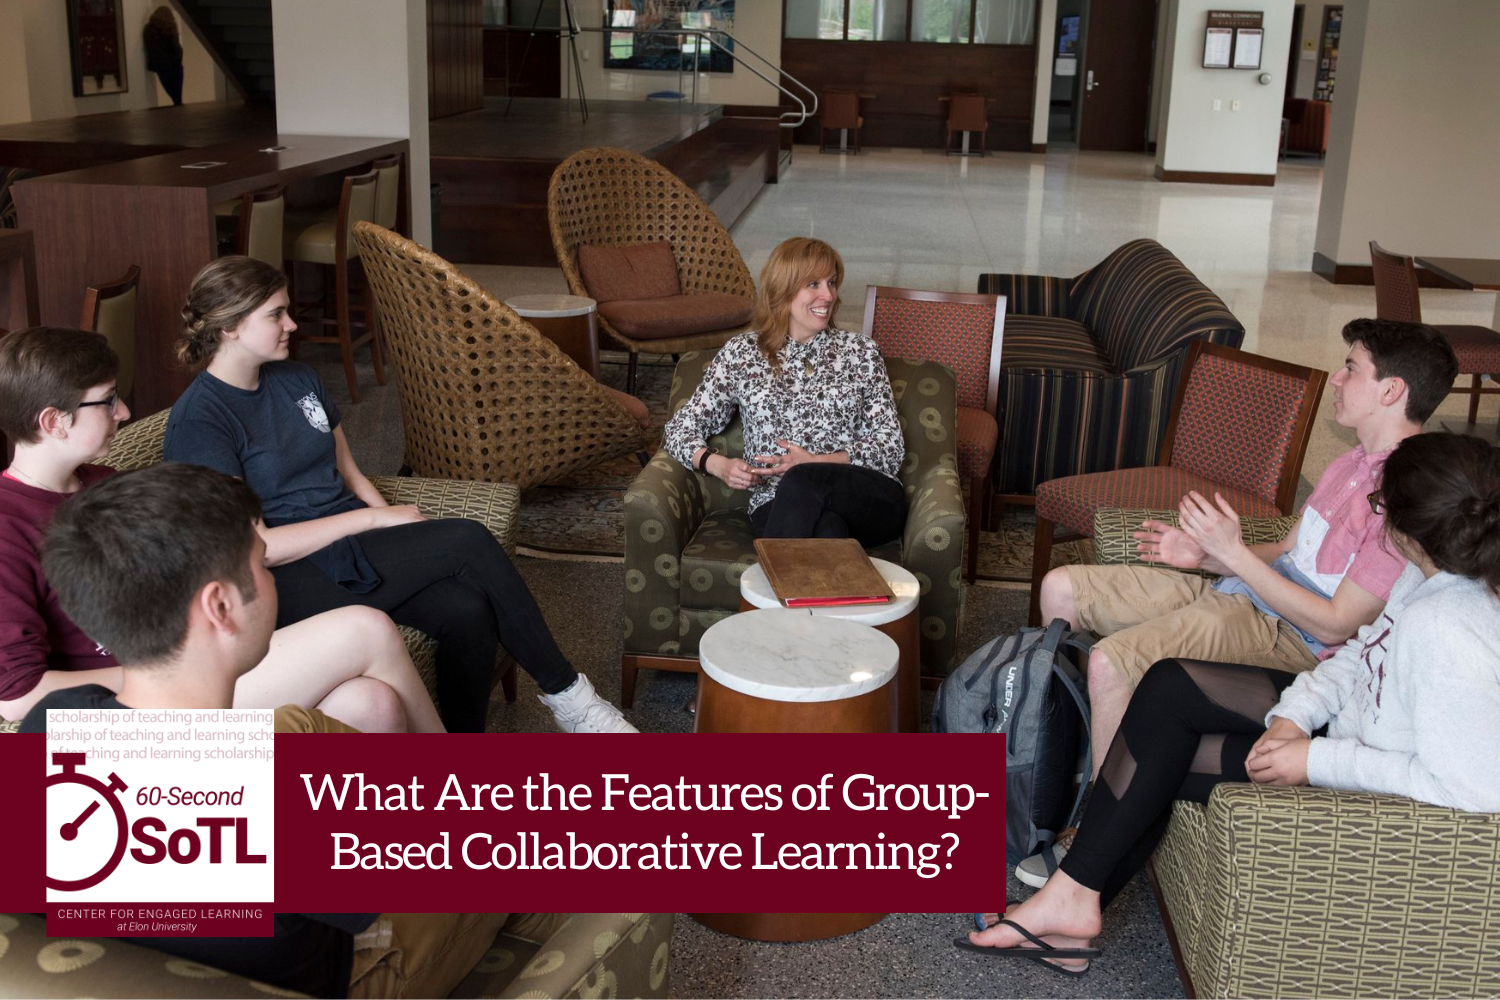 Six people sit in cushioned chairs around small tables. One person is gesturing while talking. An overlay reads, "60-Second SoTL: What are the features of group-based collaborative learning?"